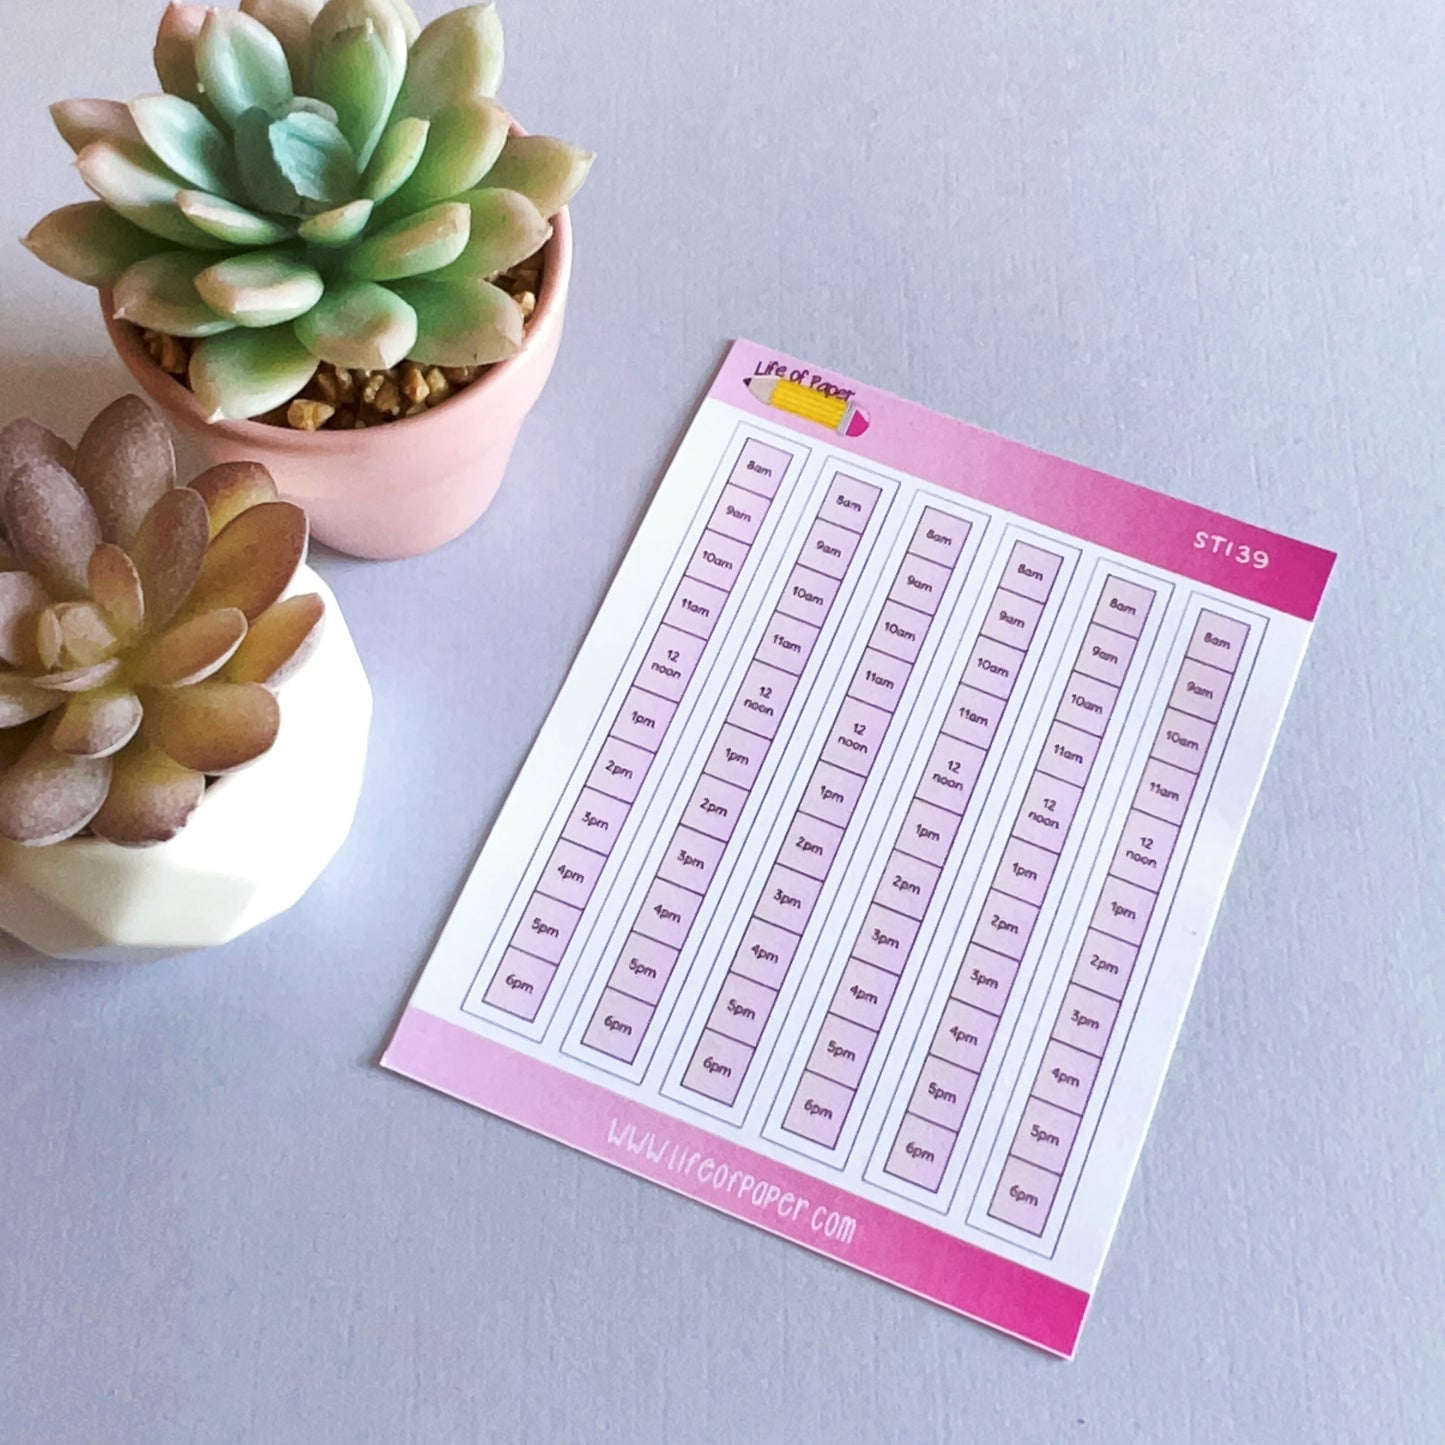 A sheet of Daily Schedule Planner Stickers labeled with times from 7am to 6pm is placed on a flat surface. Two succulent plants in small pots, one white and one pink, are positioned to the left of the sticker sheet, ready to enhance your daily schedule. The background is a light grey color.